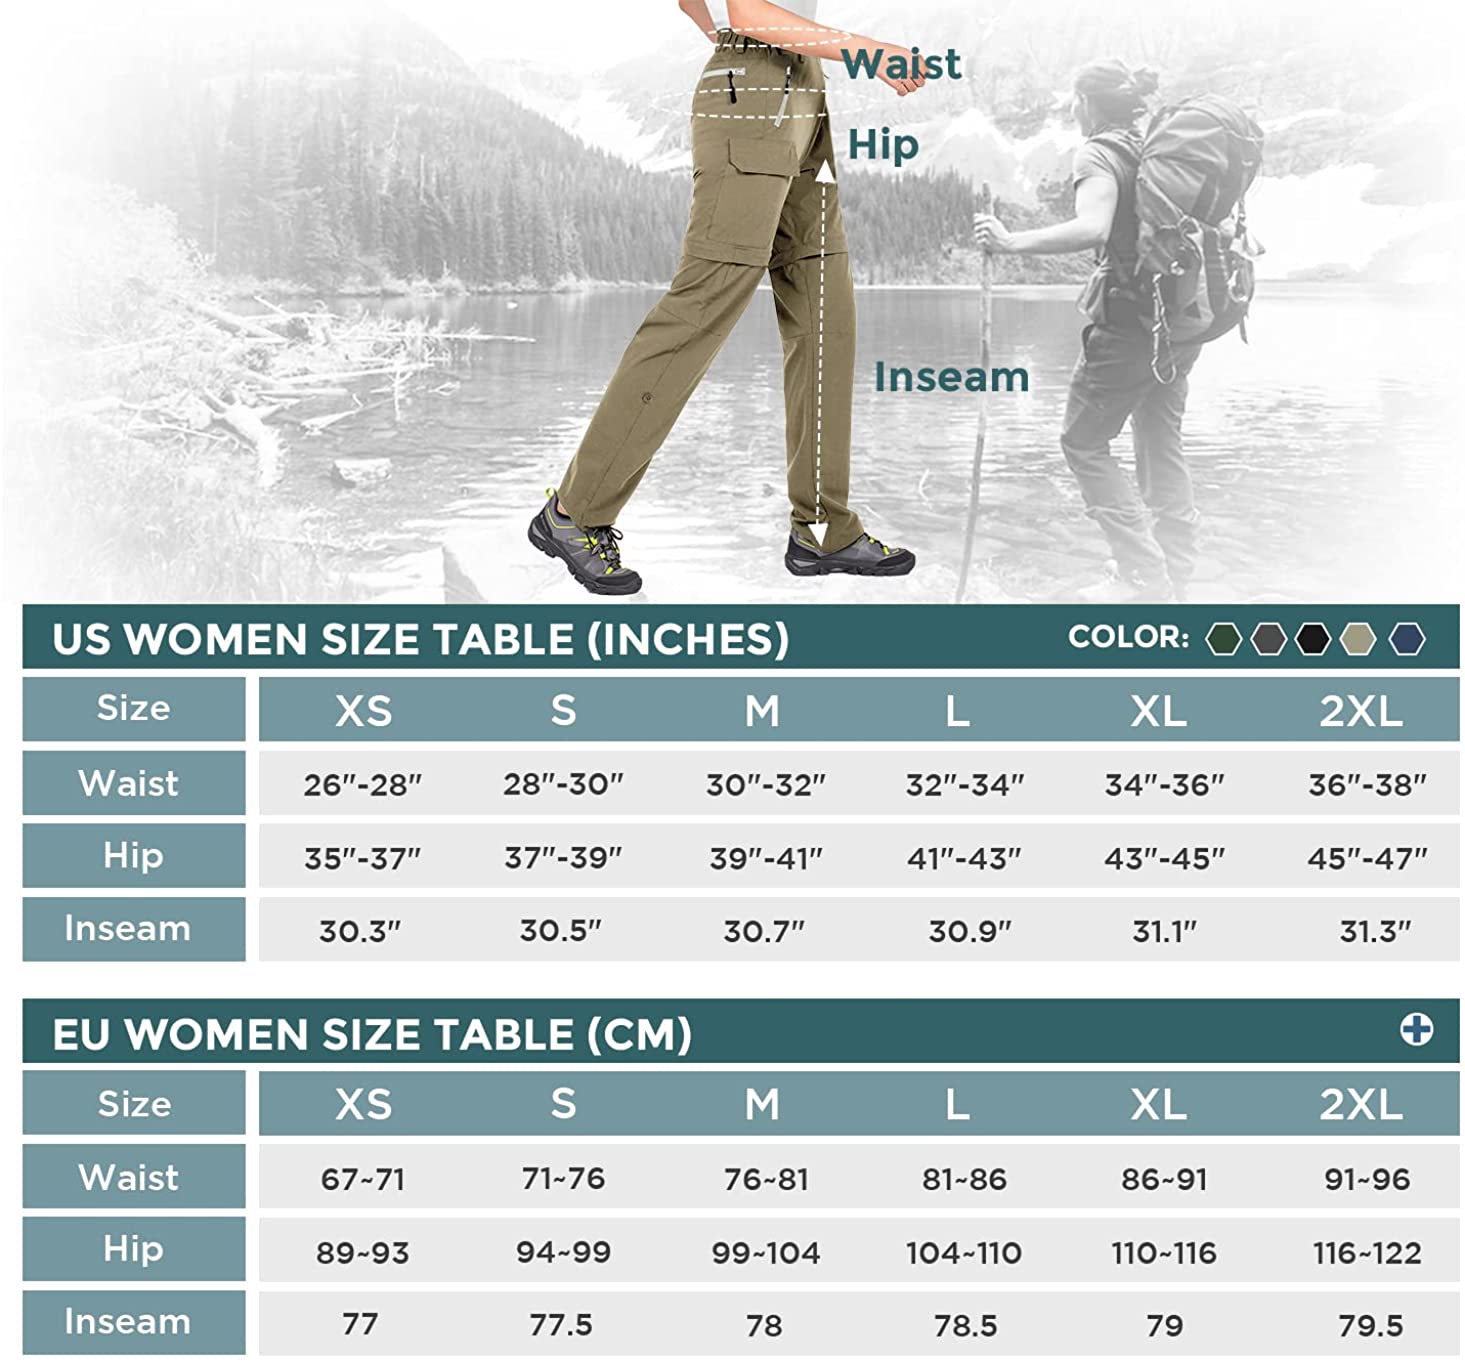 Wespornow Men's-Convertible-Hiking-Pants Quick Dry Lightweight Zip Off Breathable Cargo Pants for Outdoor, Fishing, Safari